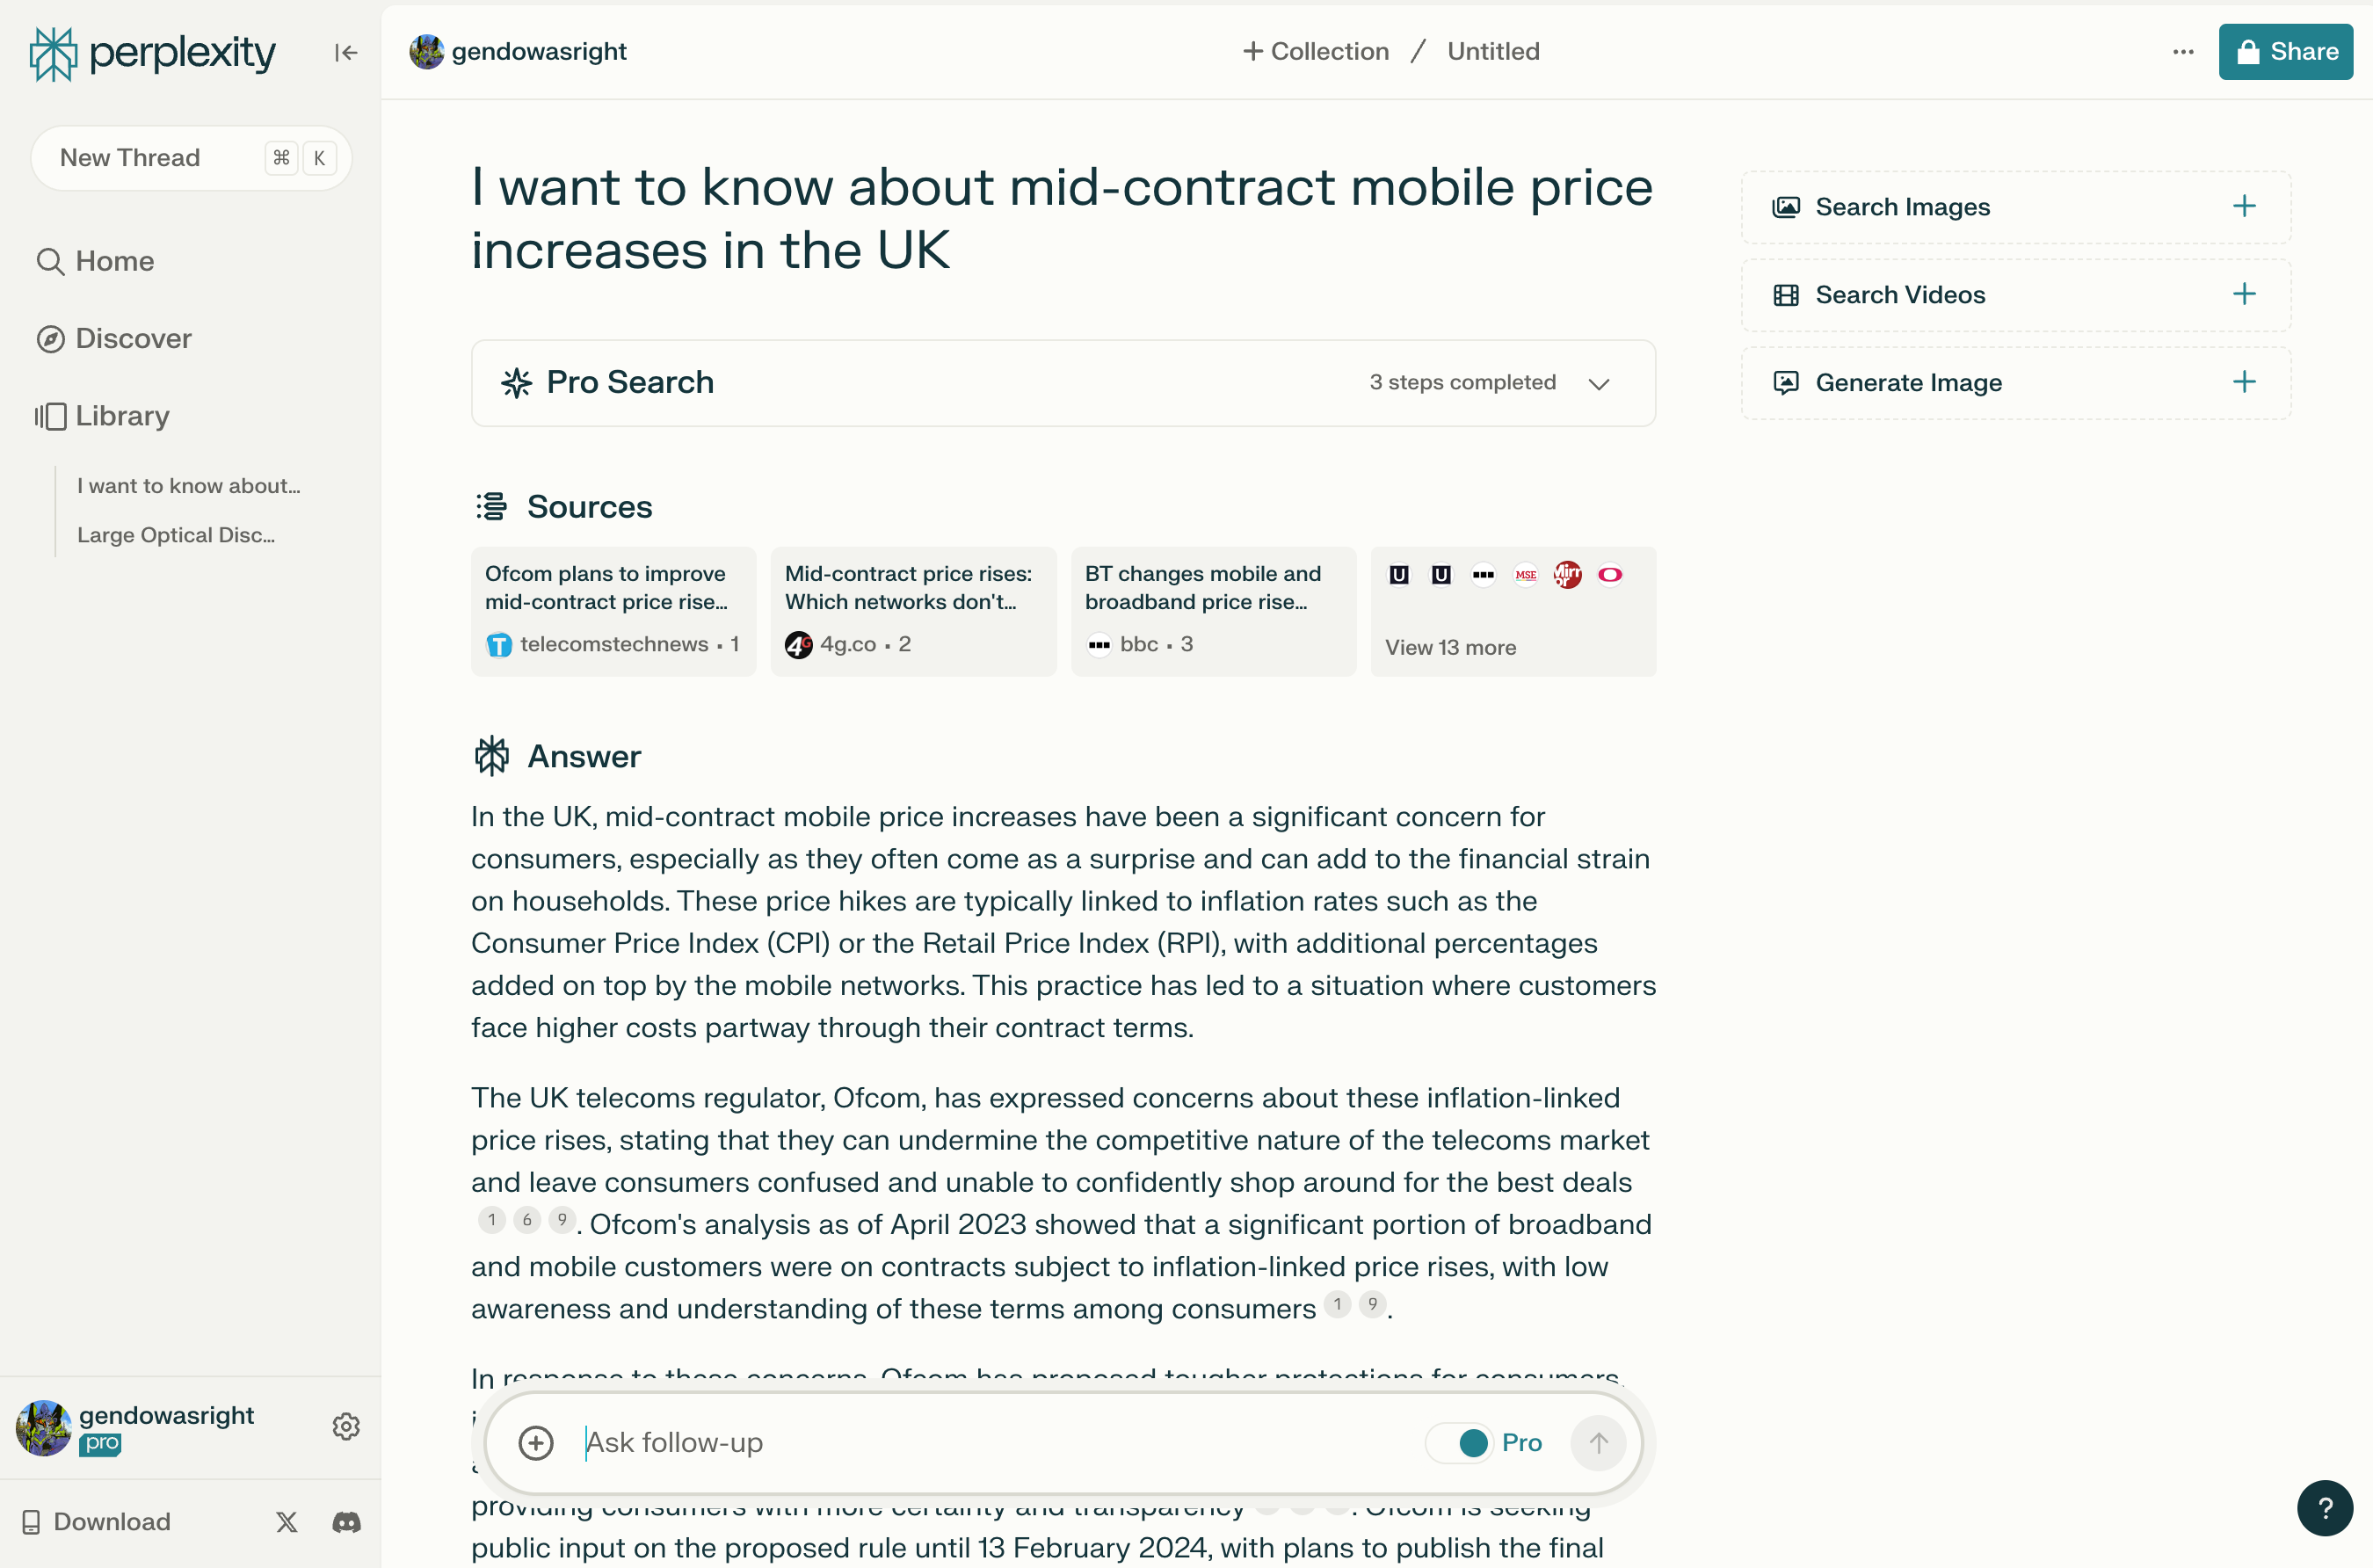 Perplexity Pro web interface showing a research summary about UK mobile internet contract price increases